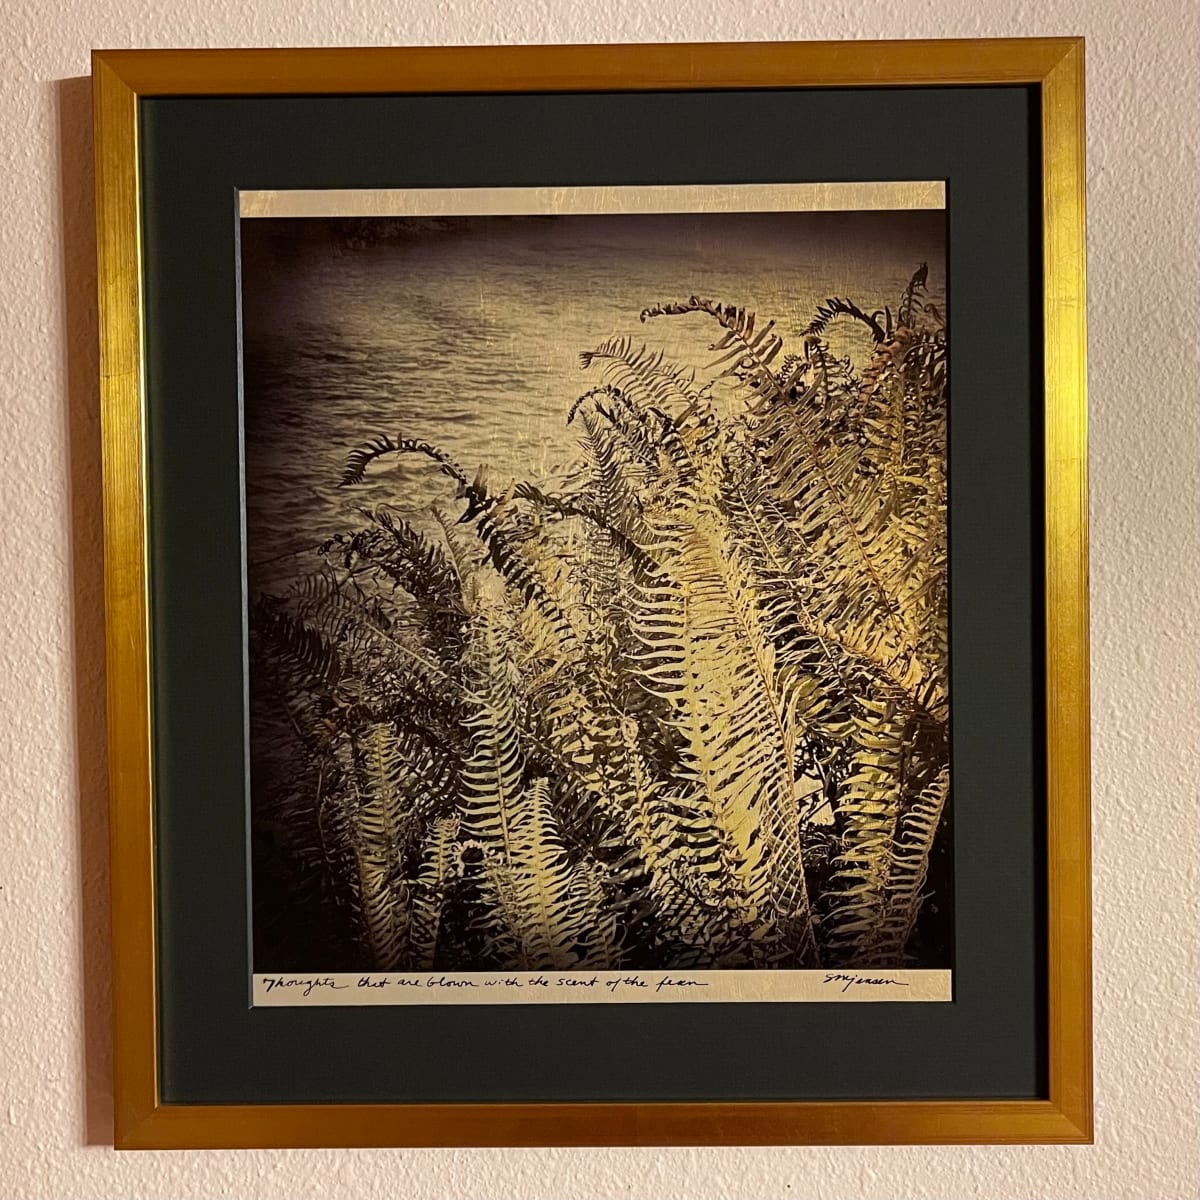 Scent of a Fern by Sandy Brown Jensen, I Dream in Gold  Image: Thoughts That are Blown with the Scent of the Fern